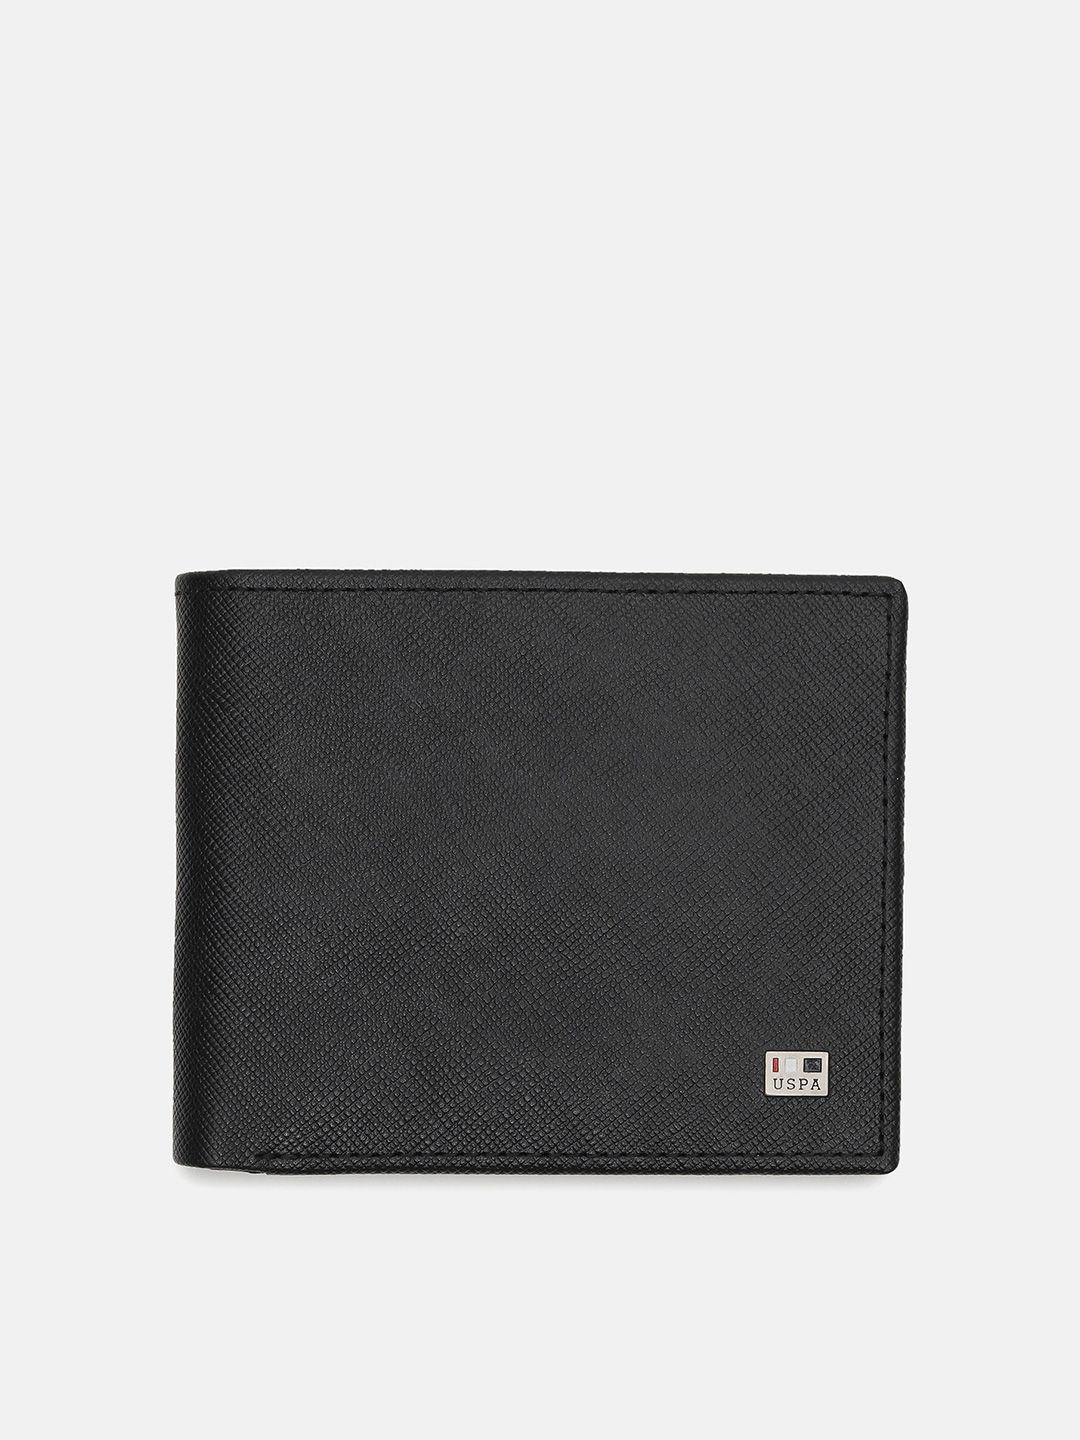 u s polo assn men black textured leather two fold wallet